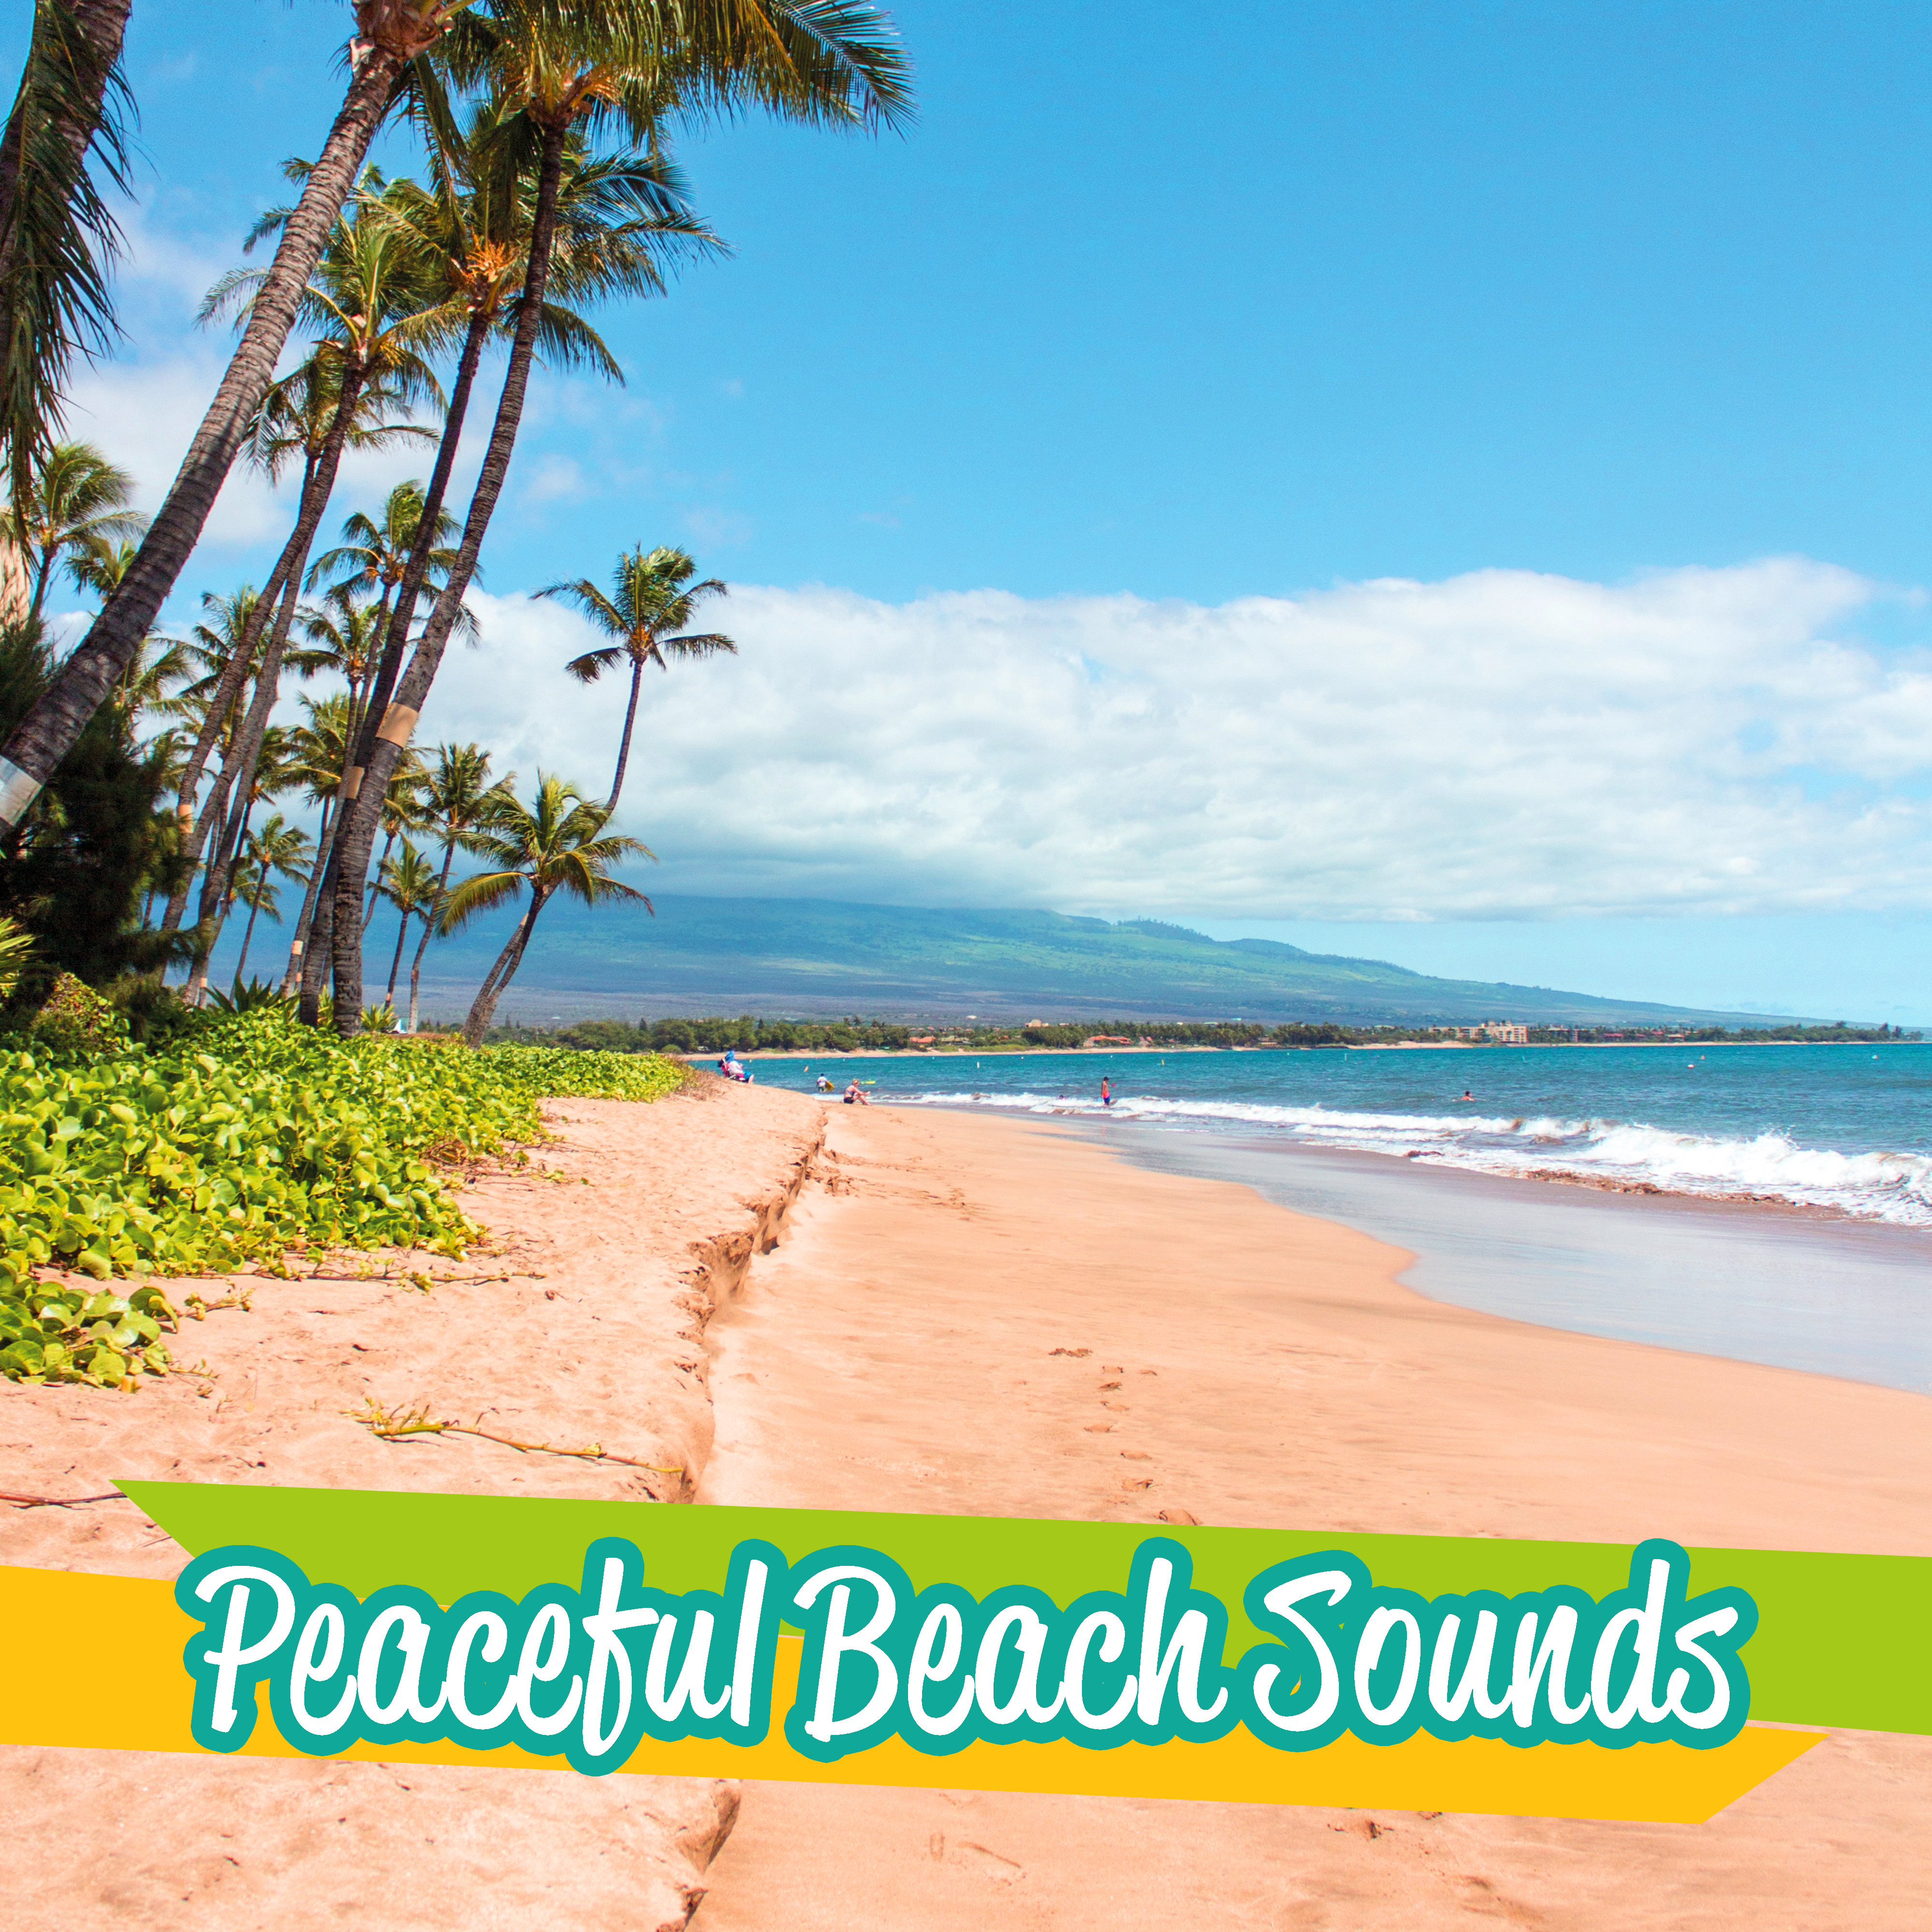 Peaceful Beach Sounds  Relaxing Melodies to Relax, Stress Free, Easy Listening, Chill Out Beats 2017